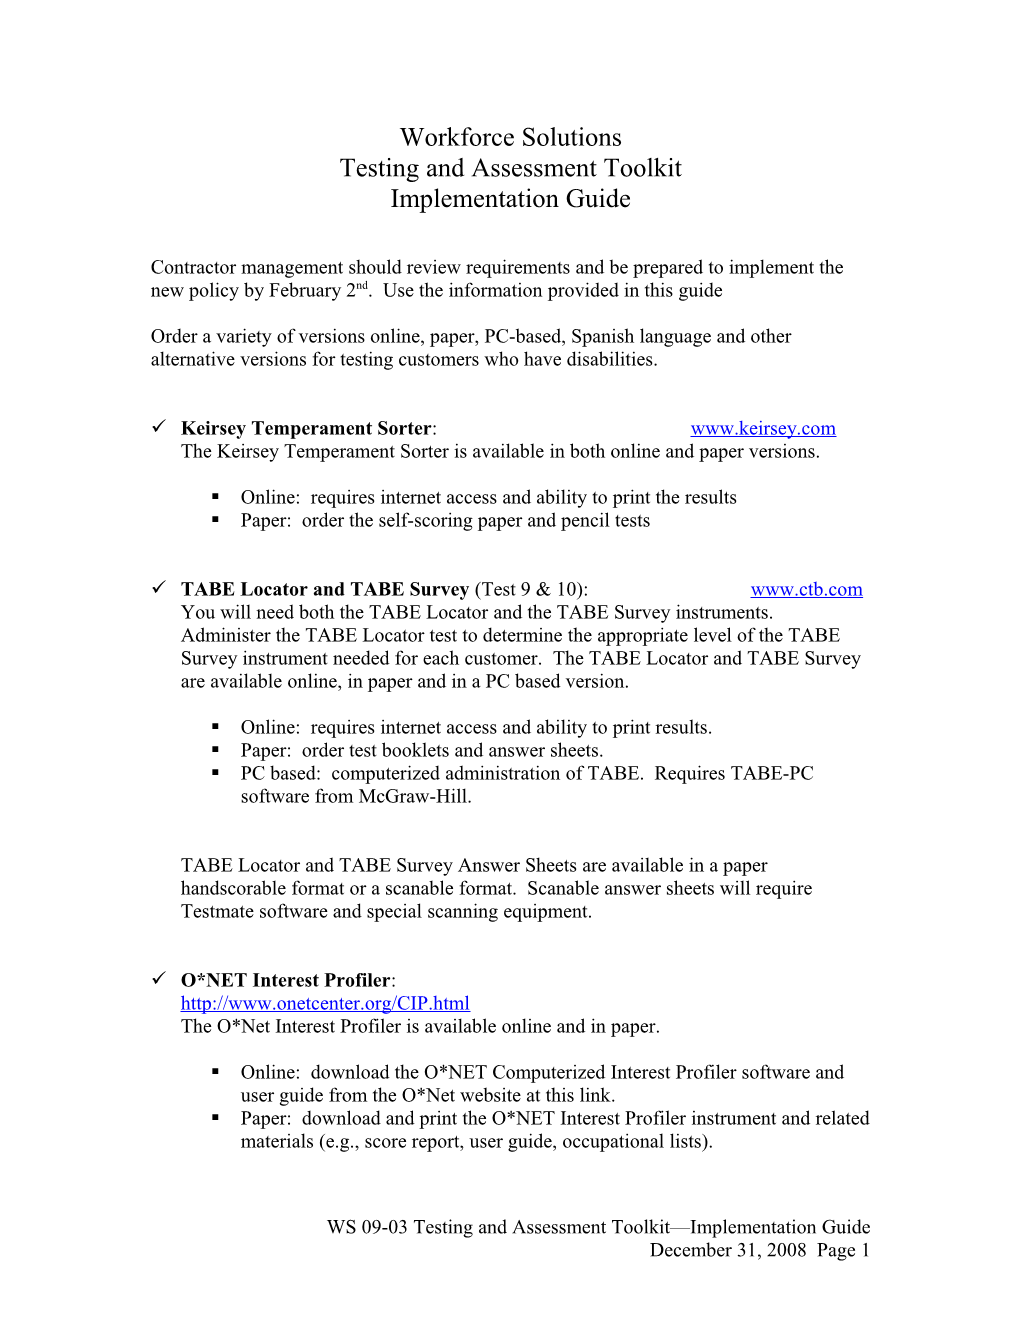 Testing and Assessment Toolkit Implementation Guide